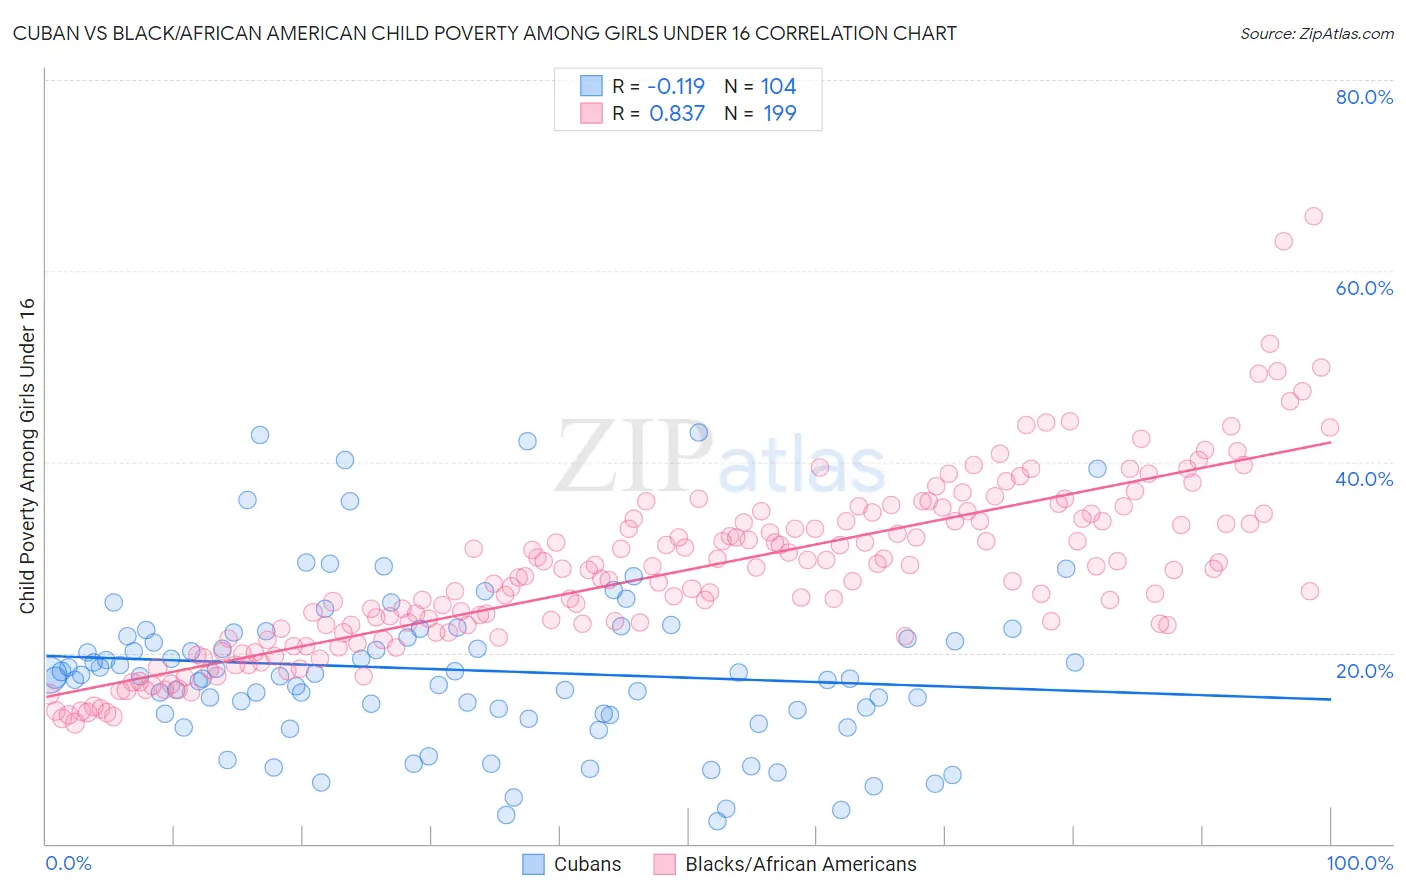 Cuban vs Black/African American Child Poverty Among Girls Under 16